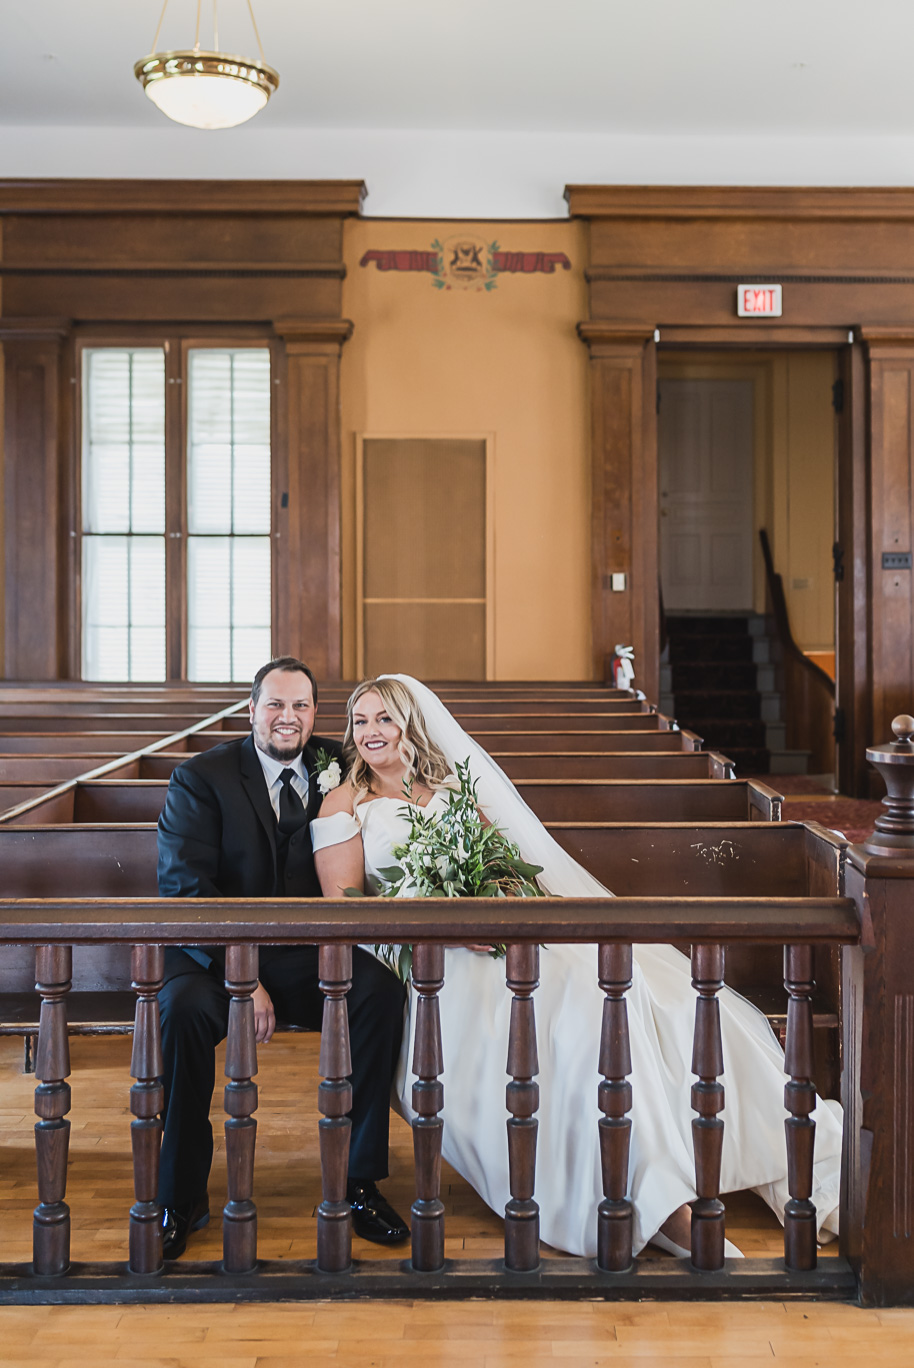 Lapeer historical courthouse micro wedding in Lapeer, Michigan provided by Kari Dawson, top-rated Michigan wedding photographer, and her team.